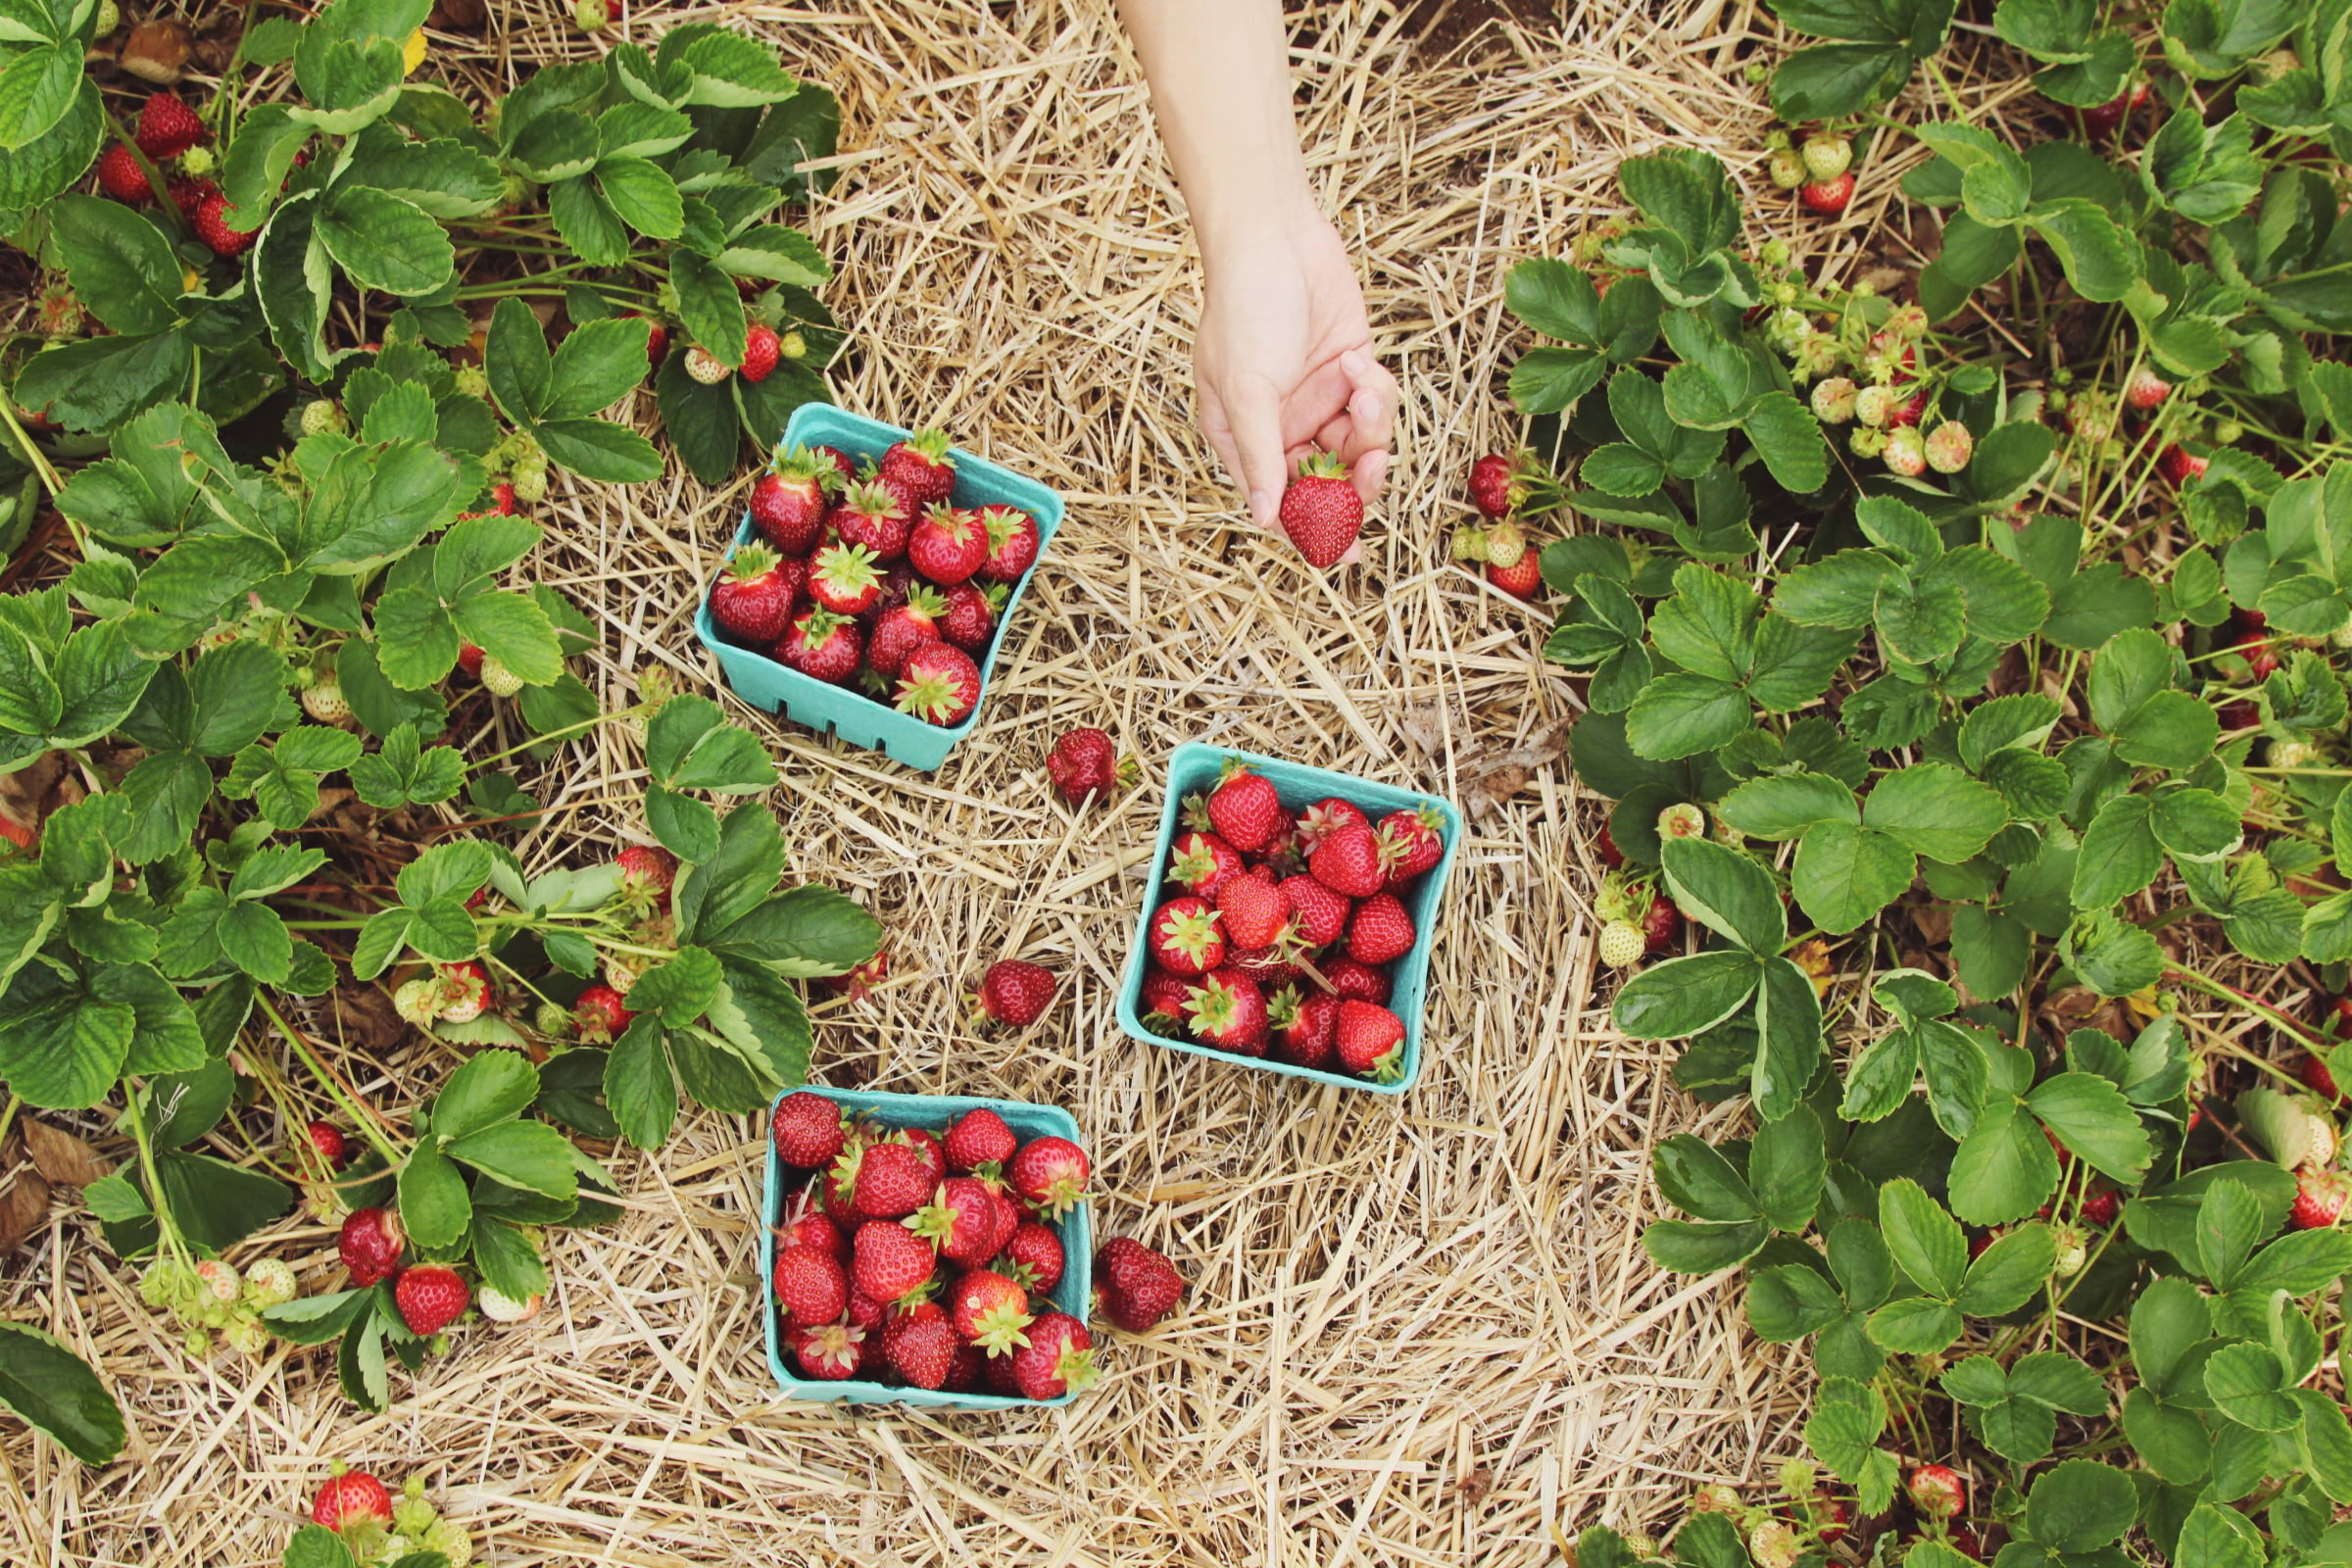 Guide to fruit picking in and around London